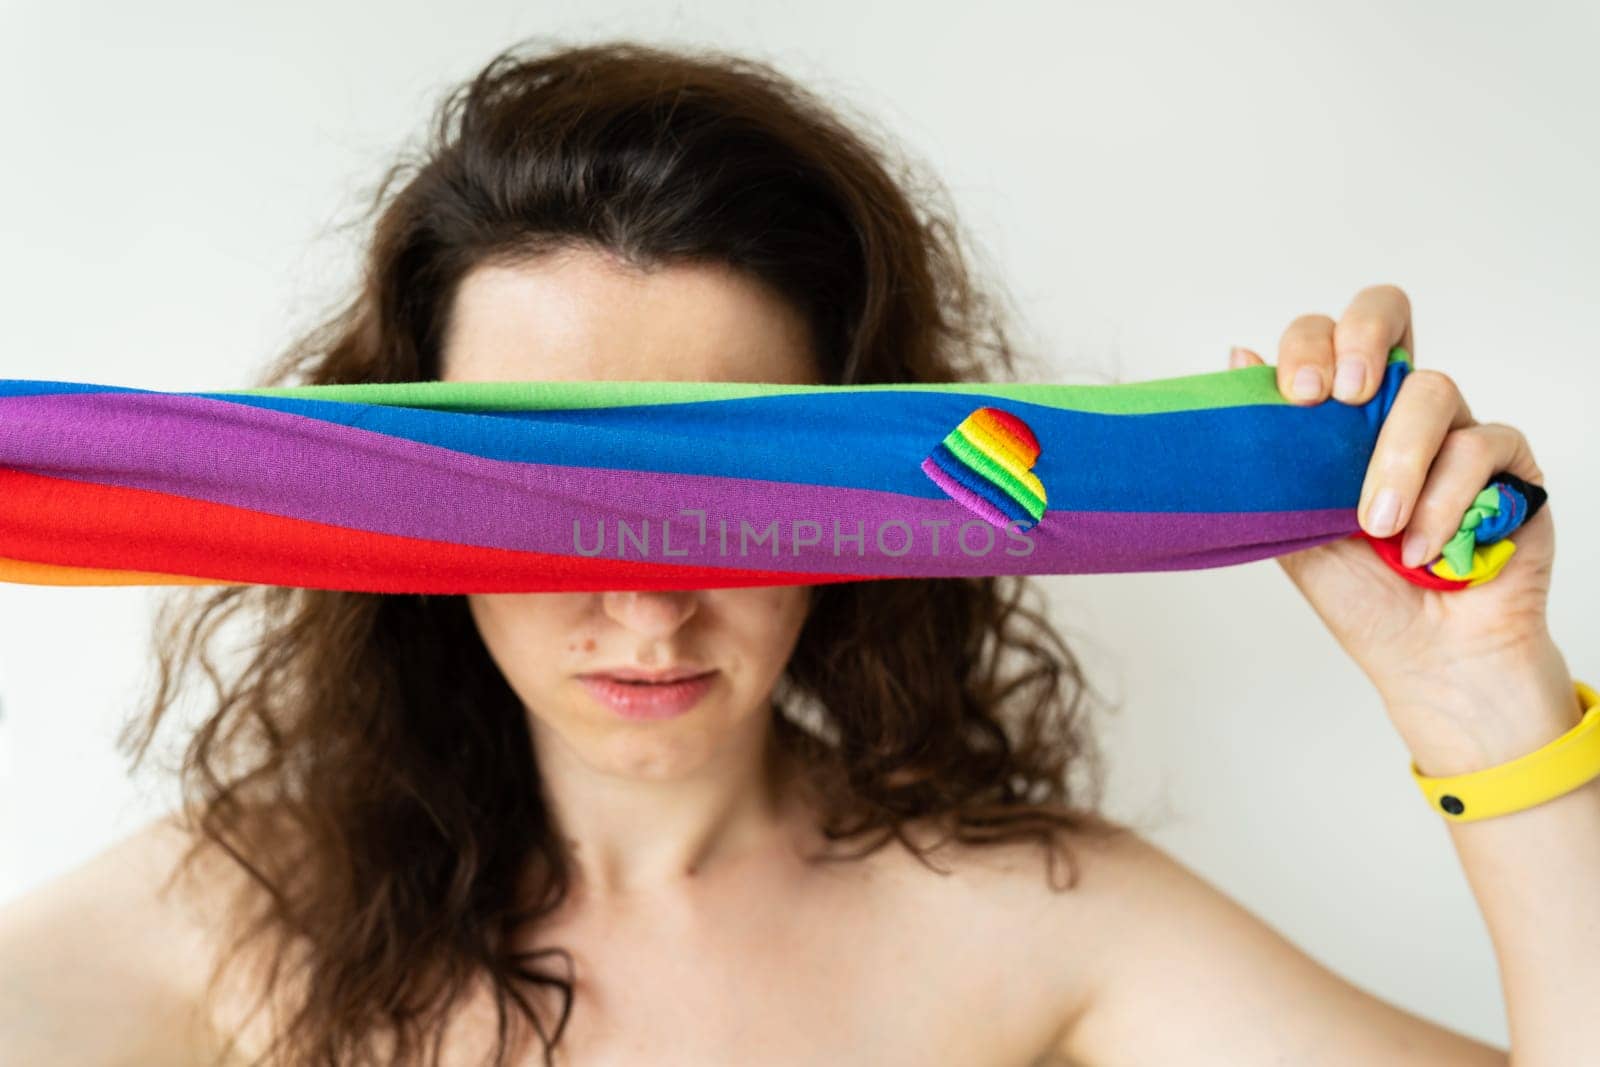 LGBT girl. The girl closes her eyes with a bright LGBT flag. There is no support from society for hiding your sexuality